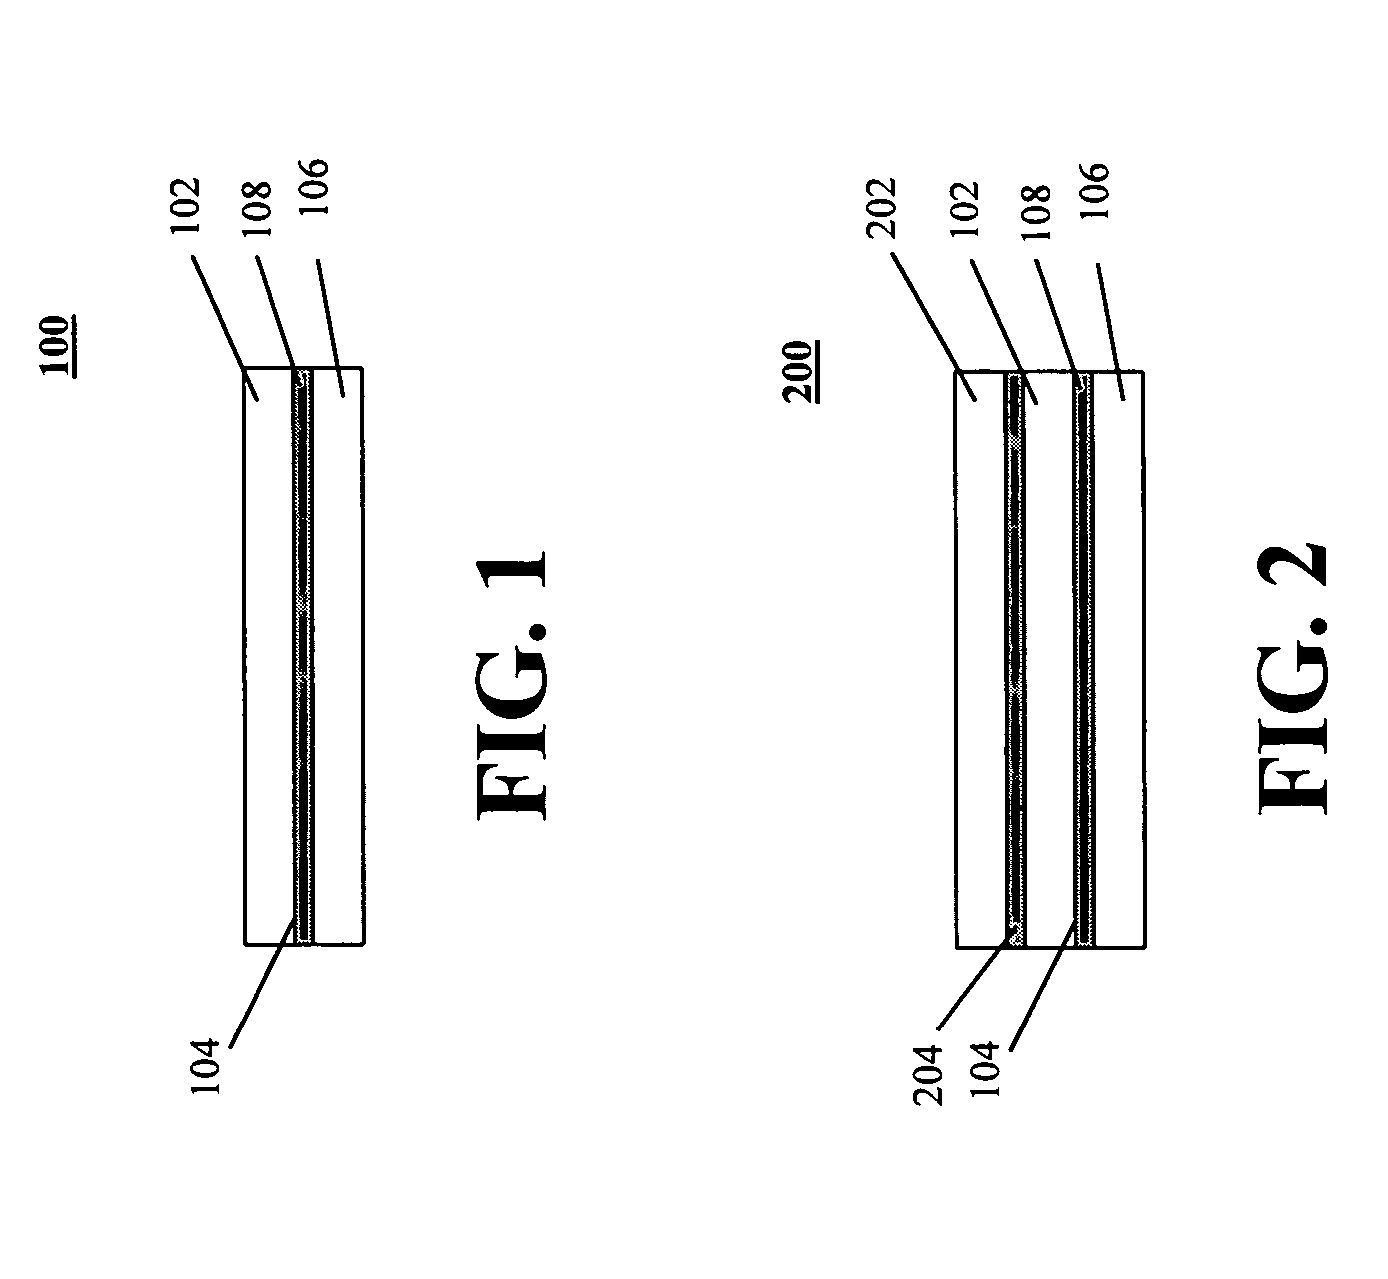 Holographic optical elements, devices and methods